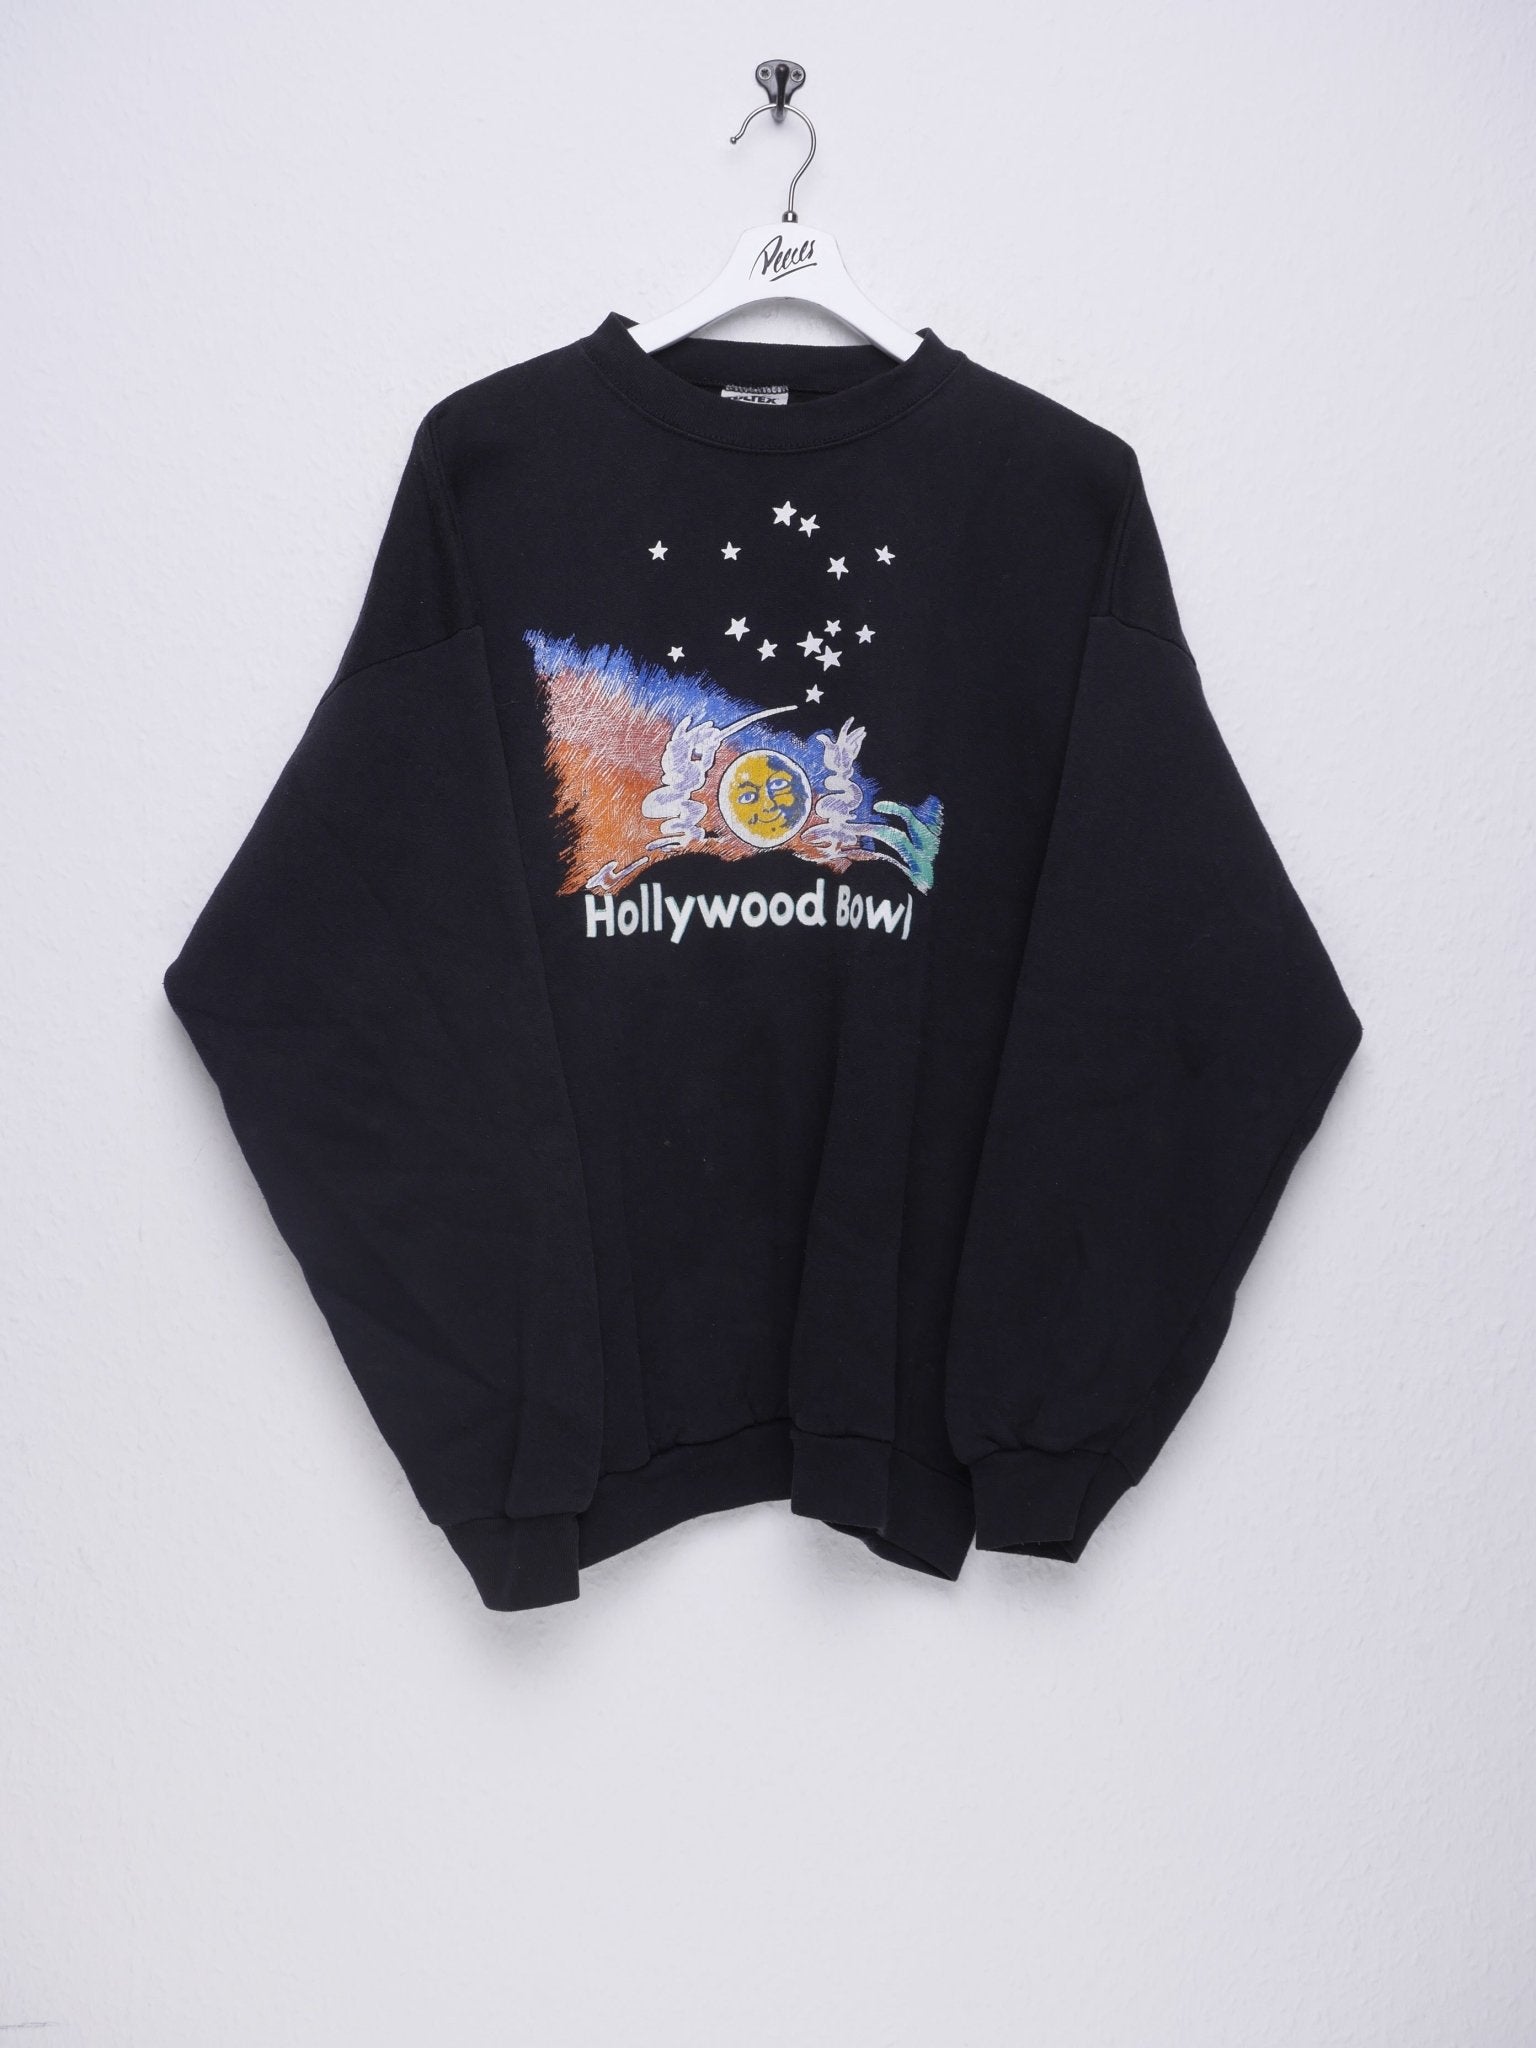 Hollywood Bowl printed Graphic black Sweater - Peeces